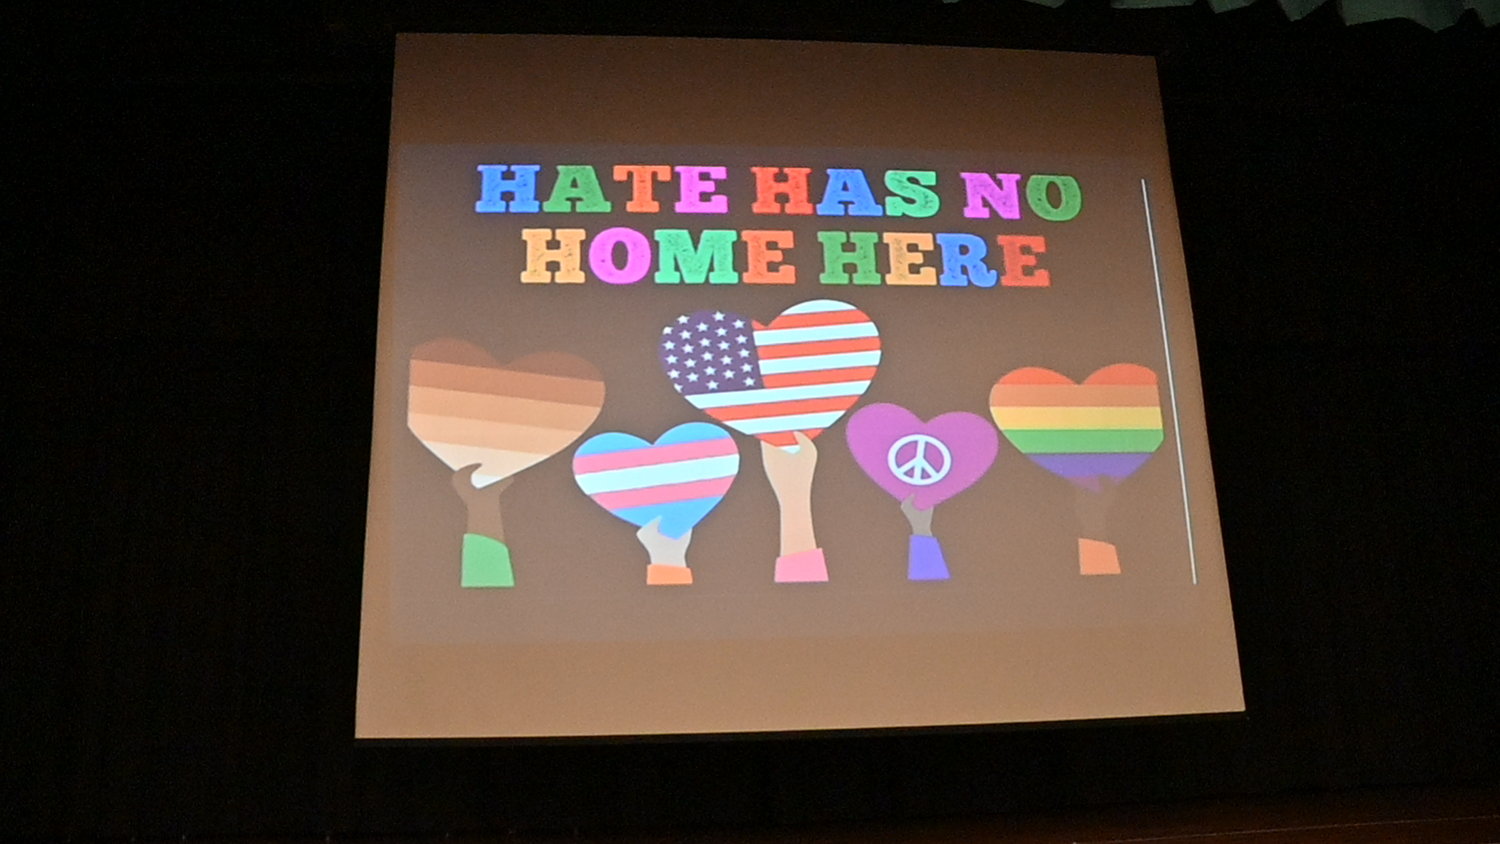 An image from the No Place for Hate presentation.